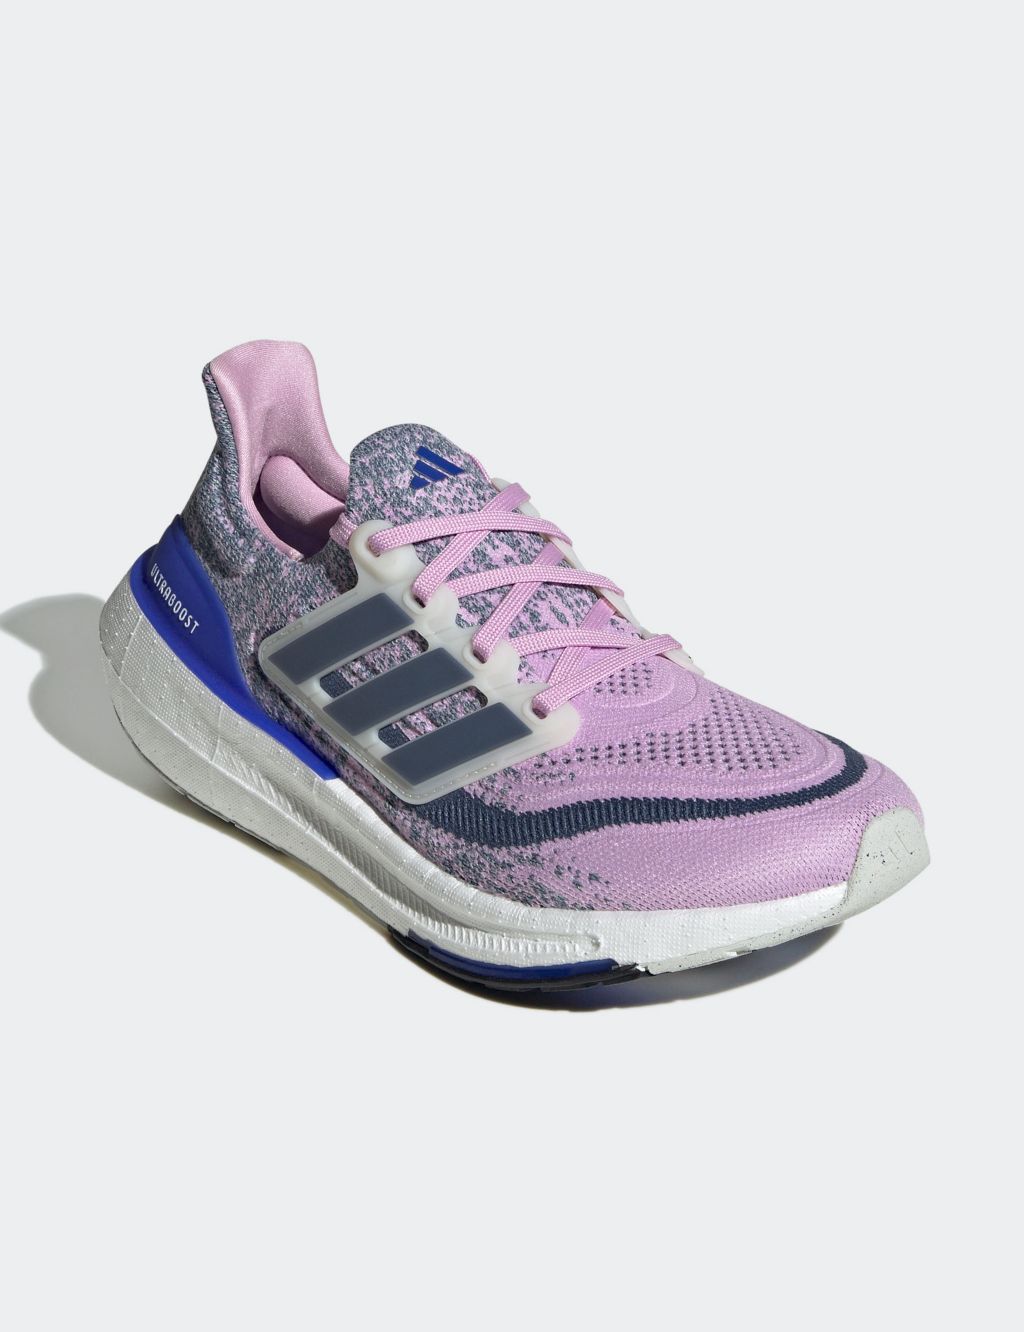 Ultraboost 23 Trainers image 2